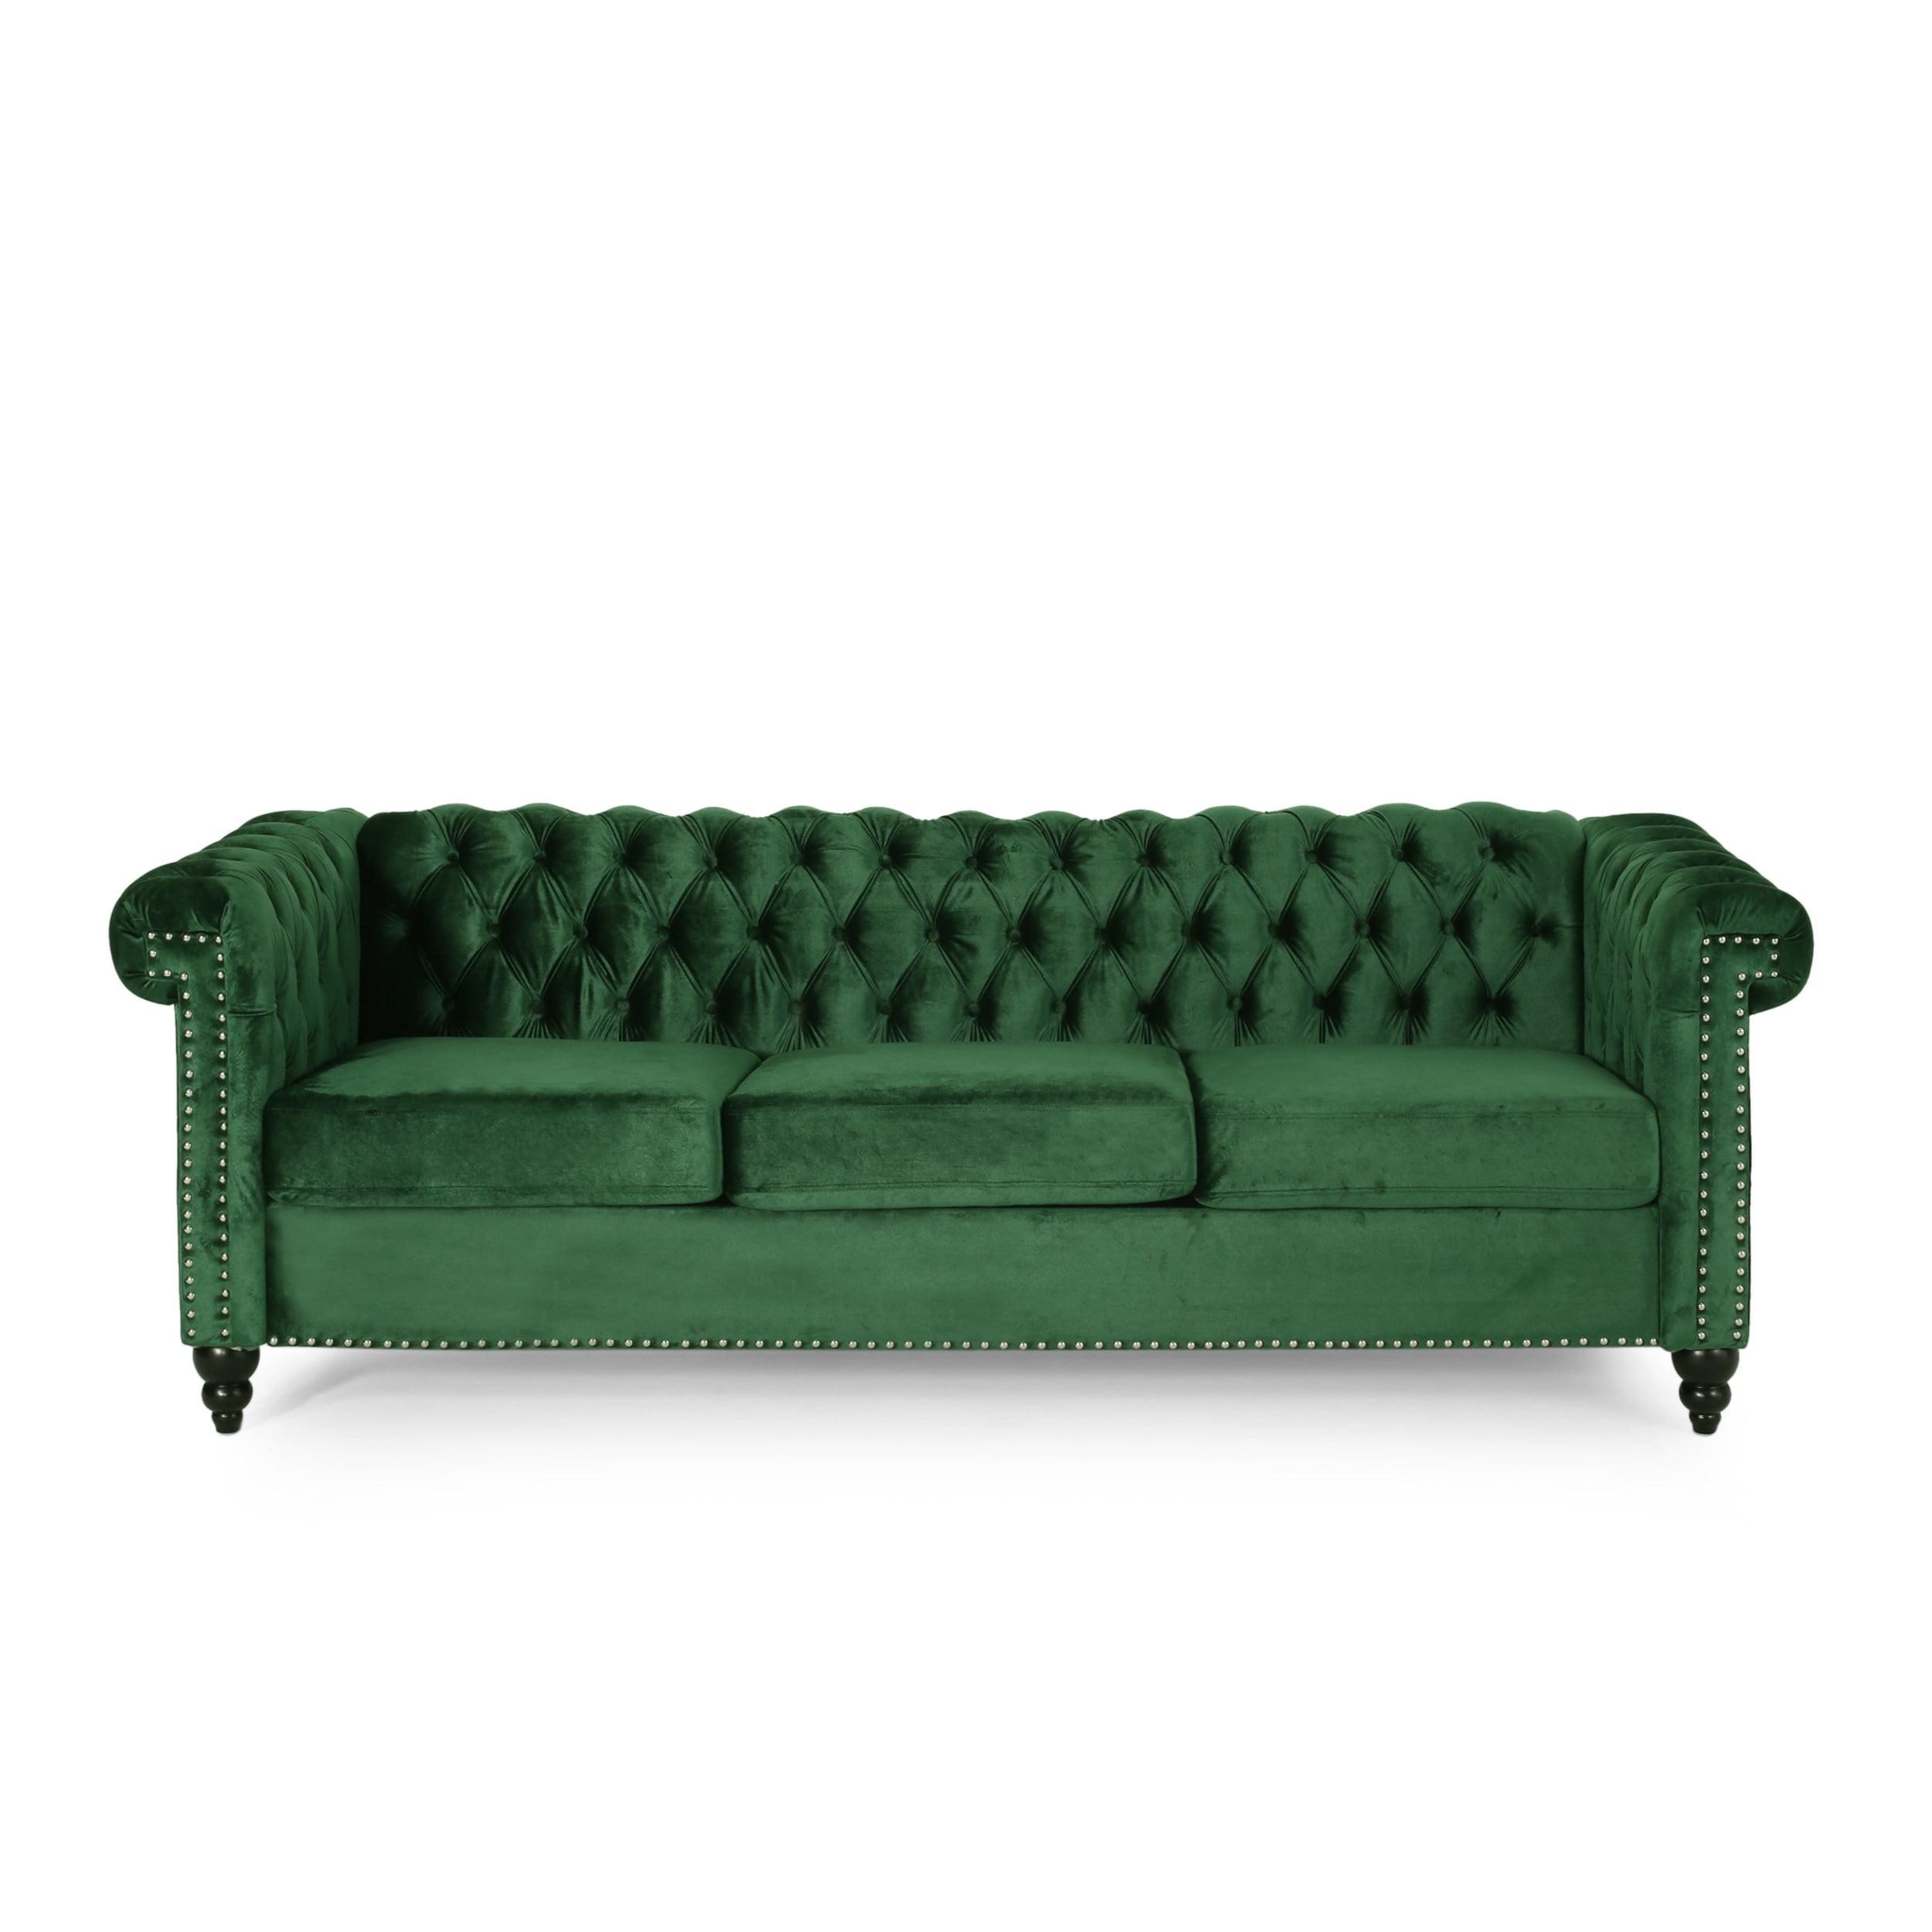 Elegant Emerald Velvet Tufted Chesterfield Sofa with Nailhead Accents